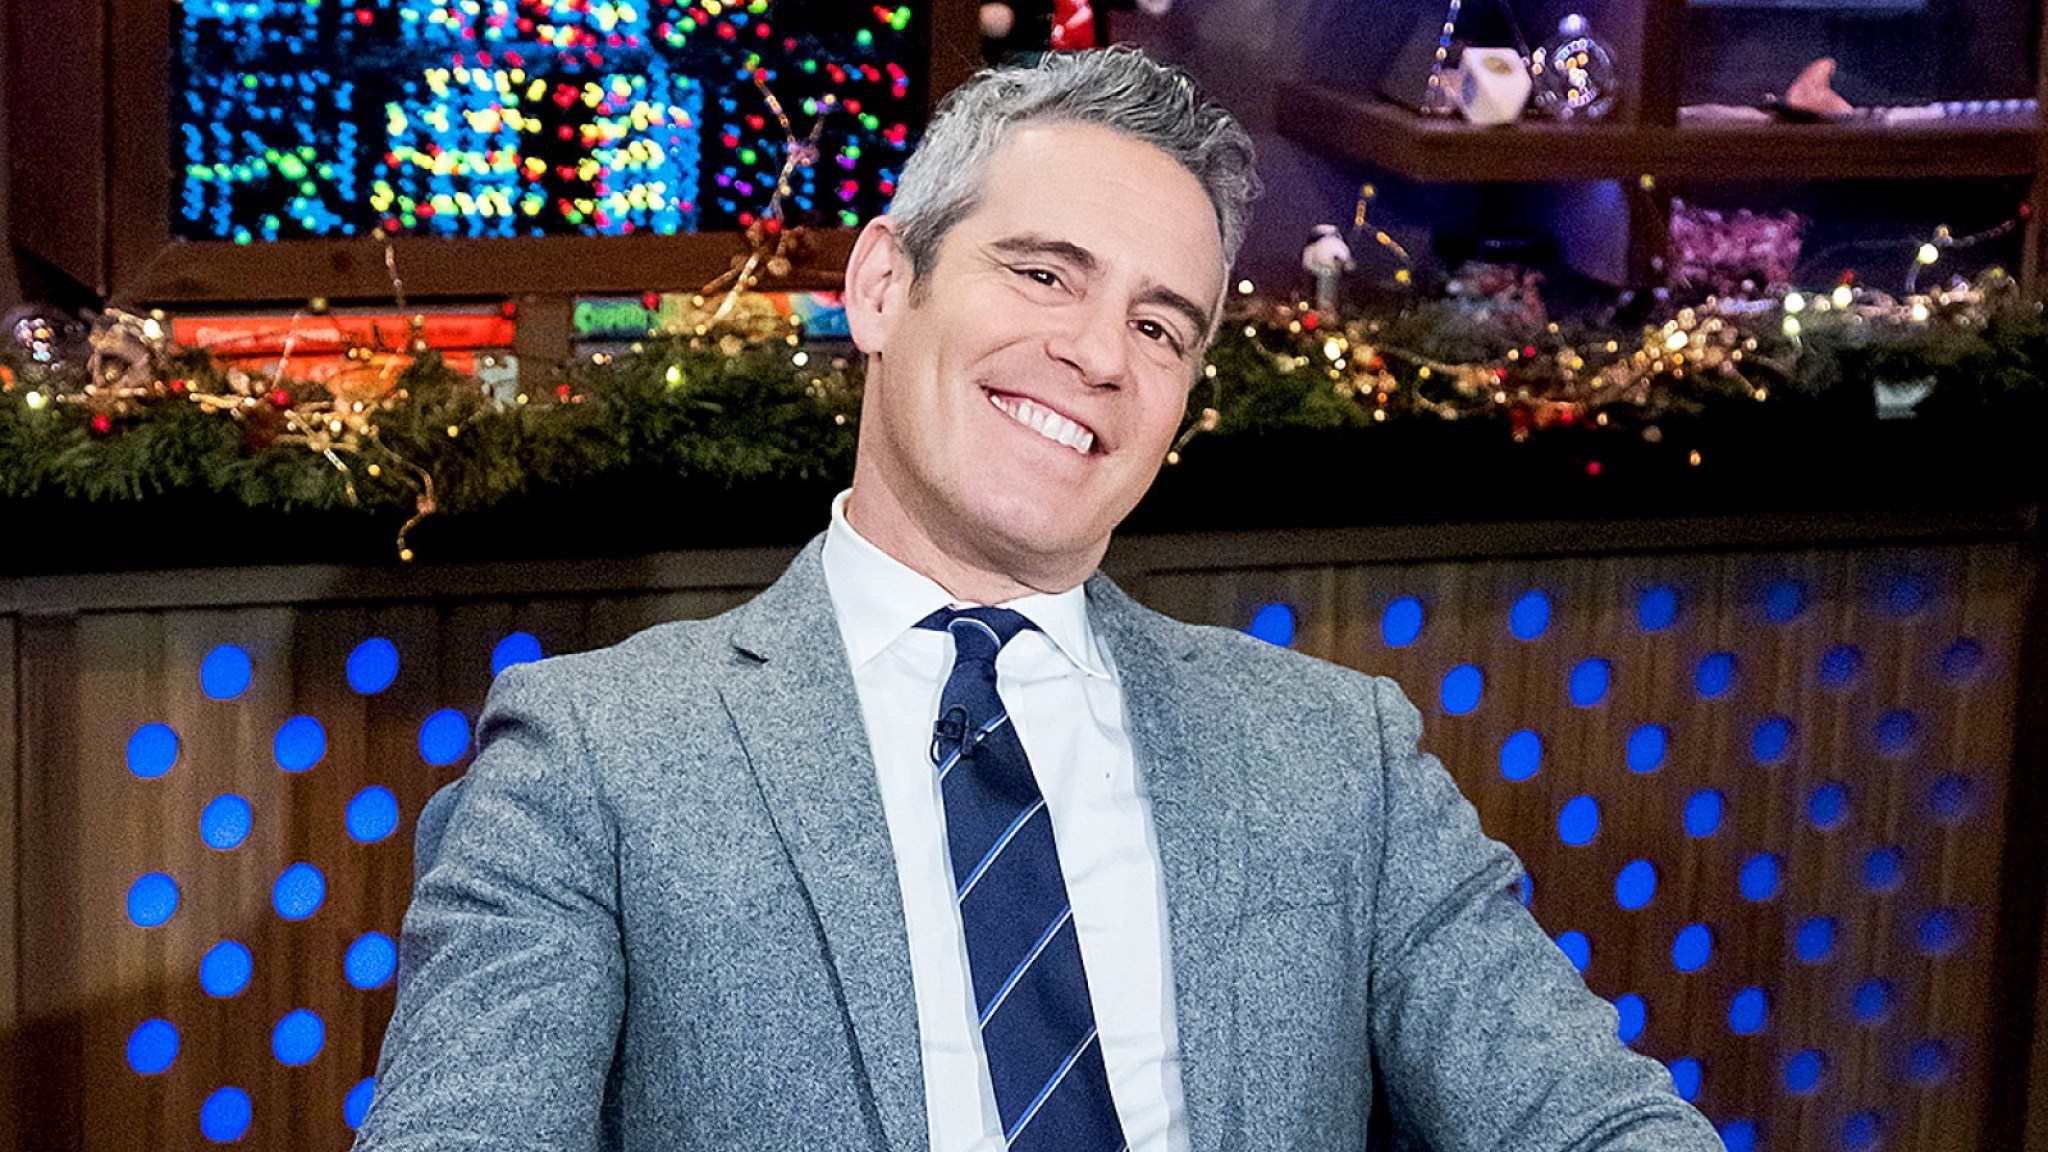 andy cohen: the champion for surrogacy